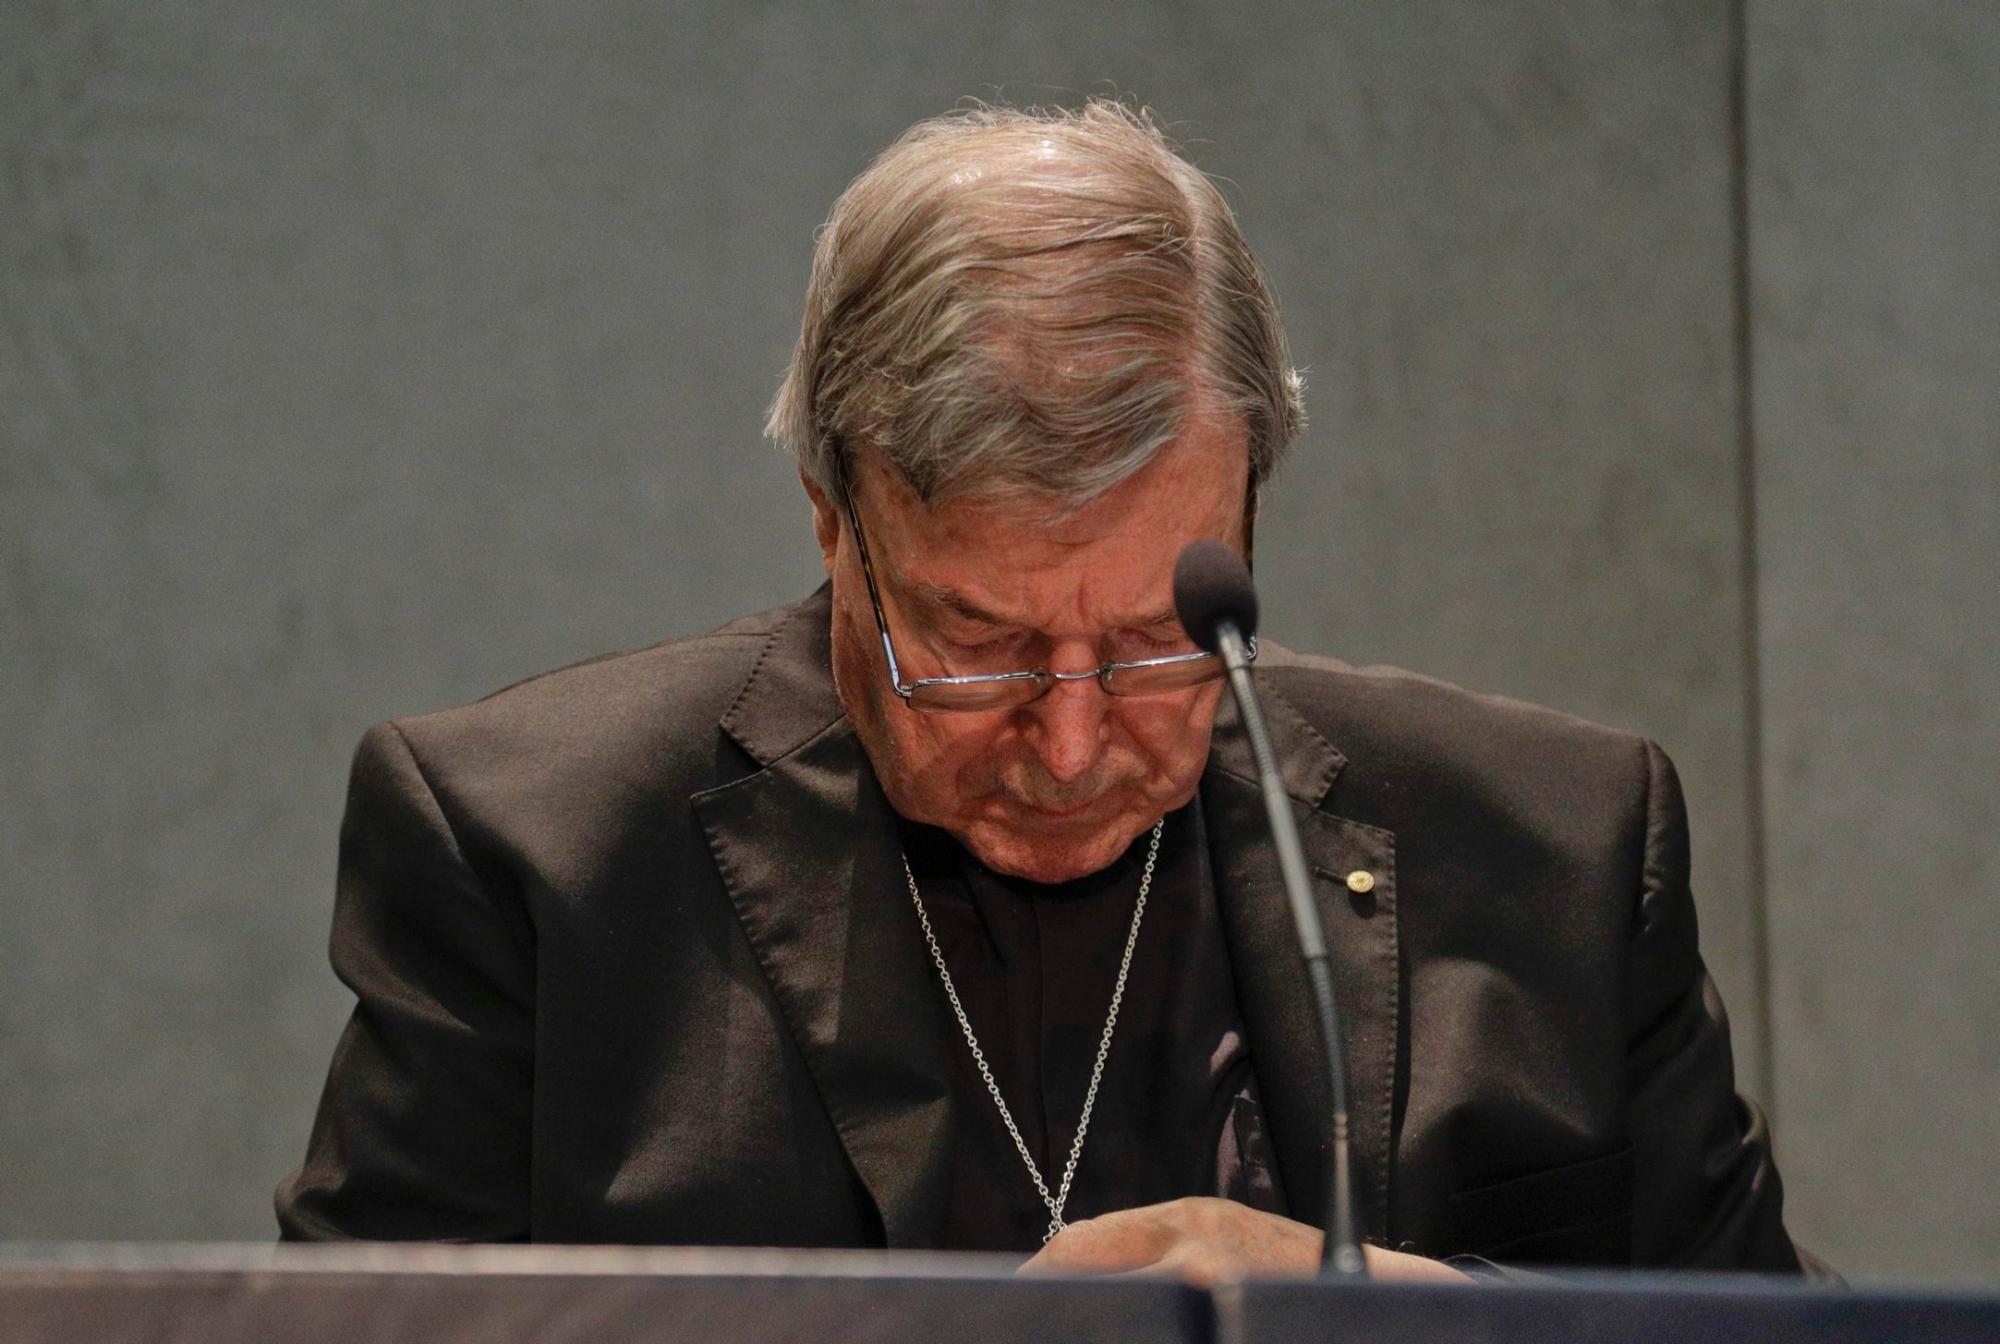 Cardinal George Pell meets the media, at the Vatican, Thursday, June 29, 2017. The Catholic Archdiocese of Sydney says Vatican Cardinal George Pell will return to Australia to fight sexual assault charges as soon as possible. (AP Photo/Gregorio Borgia) APTOPIX Vatican Pell